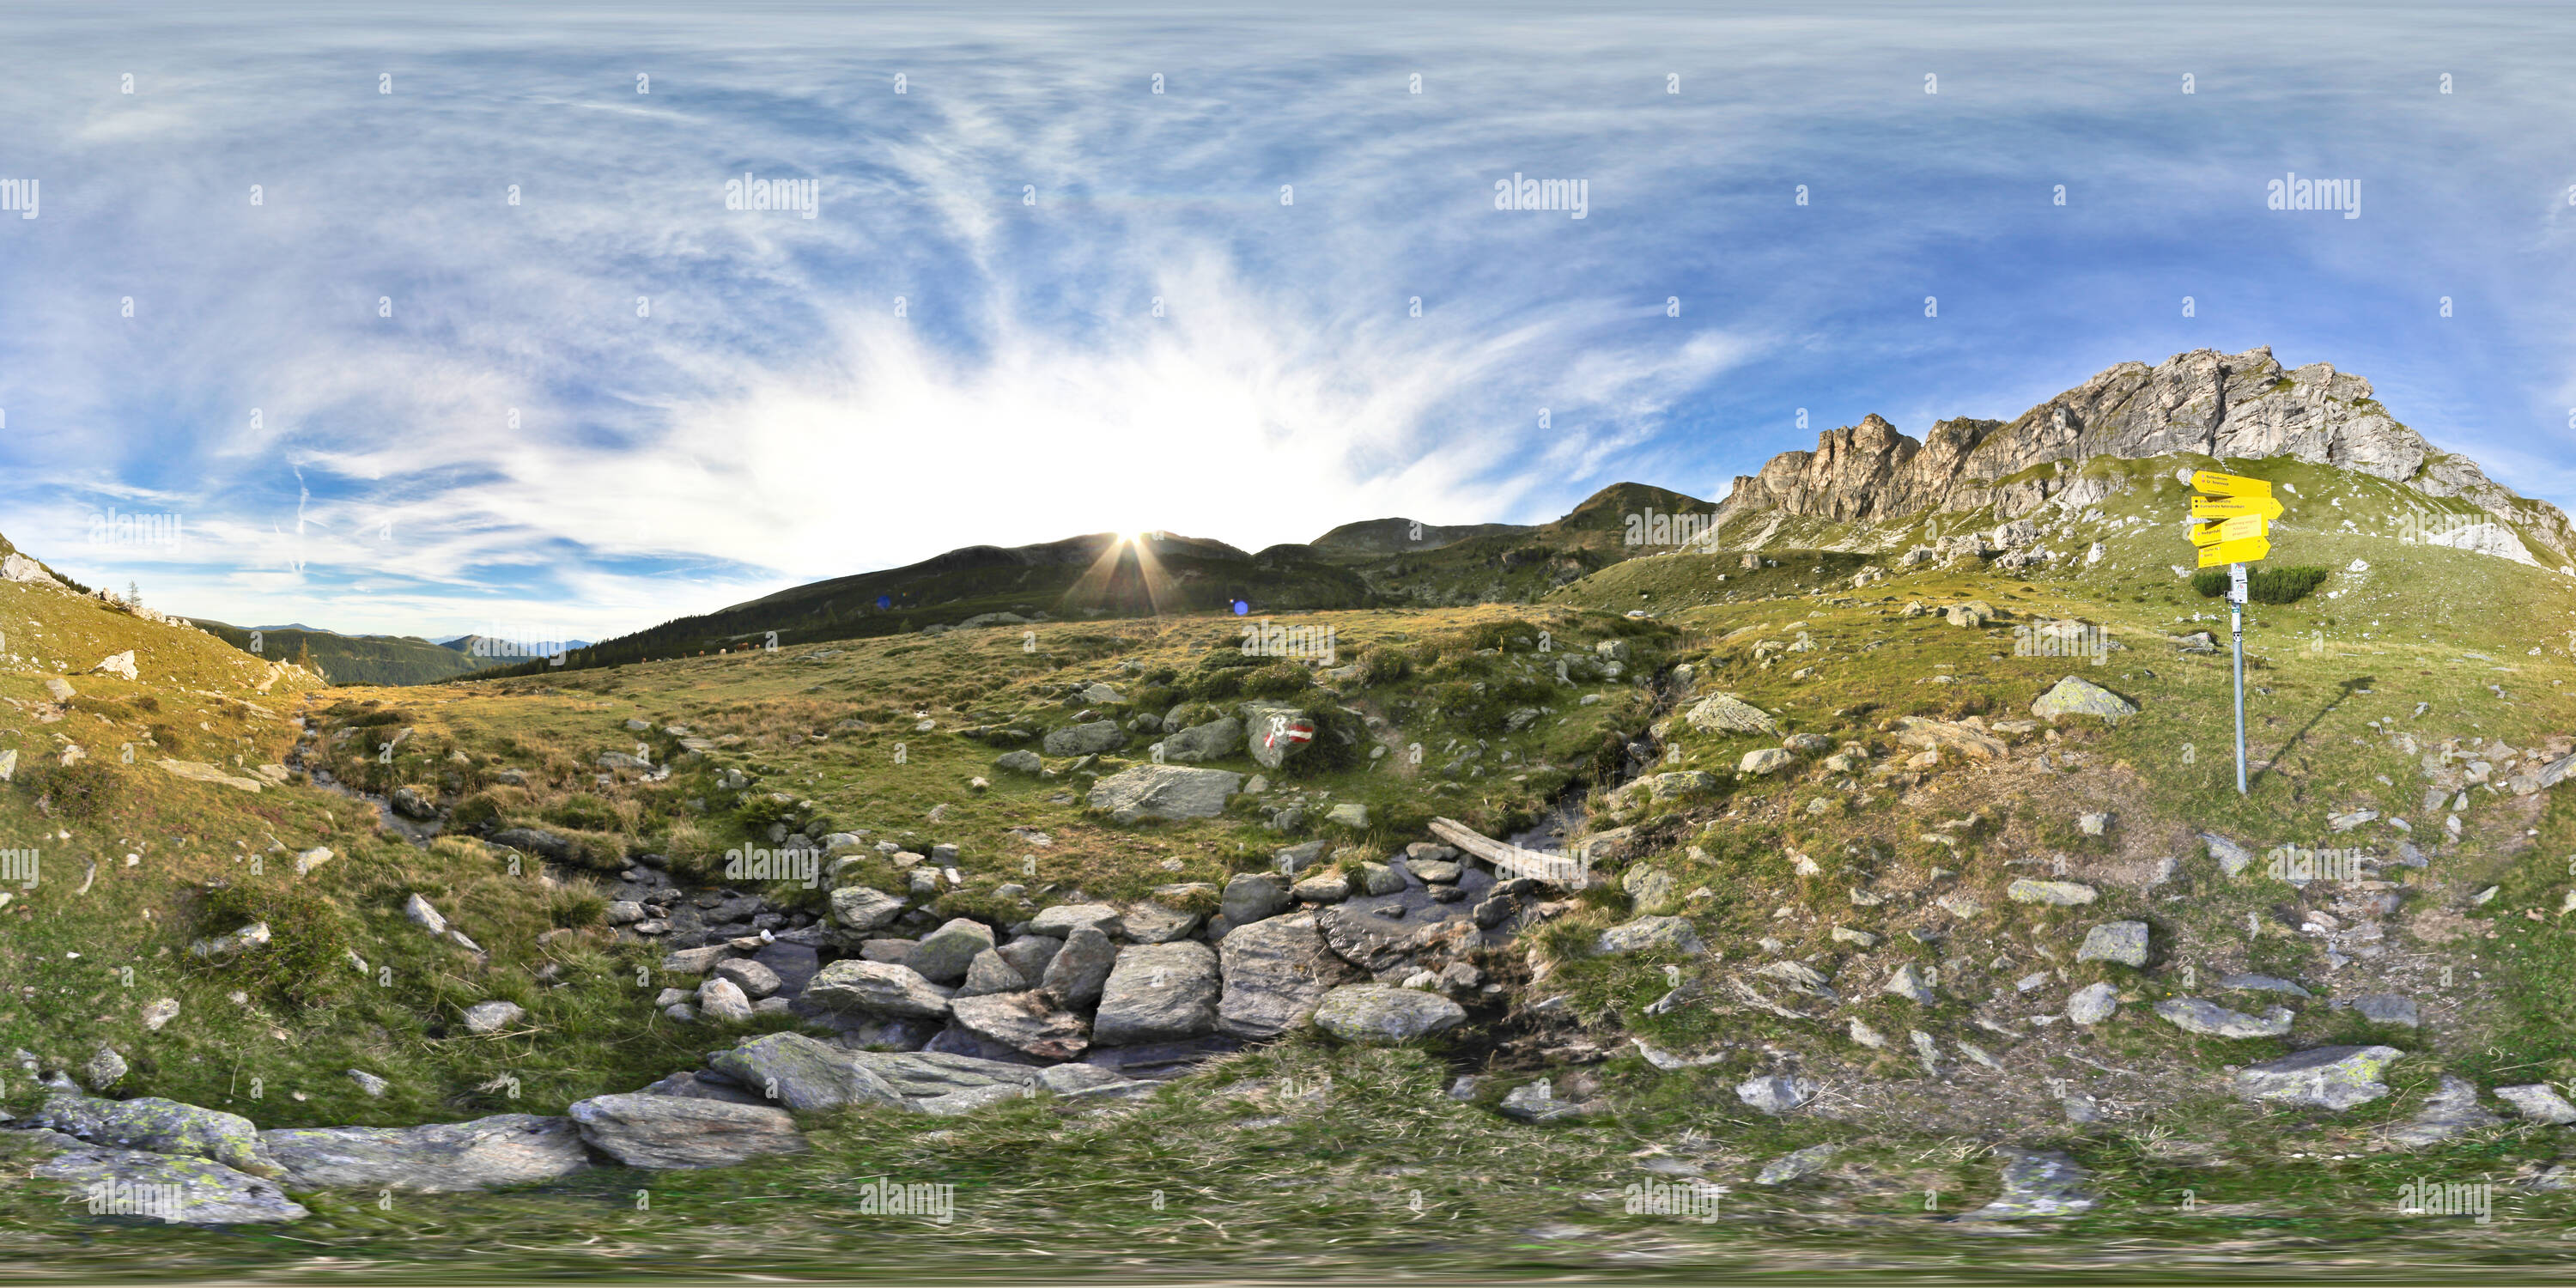 360 degree panoramic view of Nocky Mountains Sunset